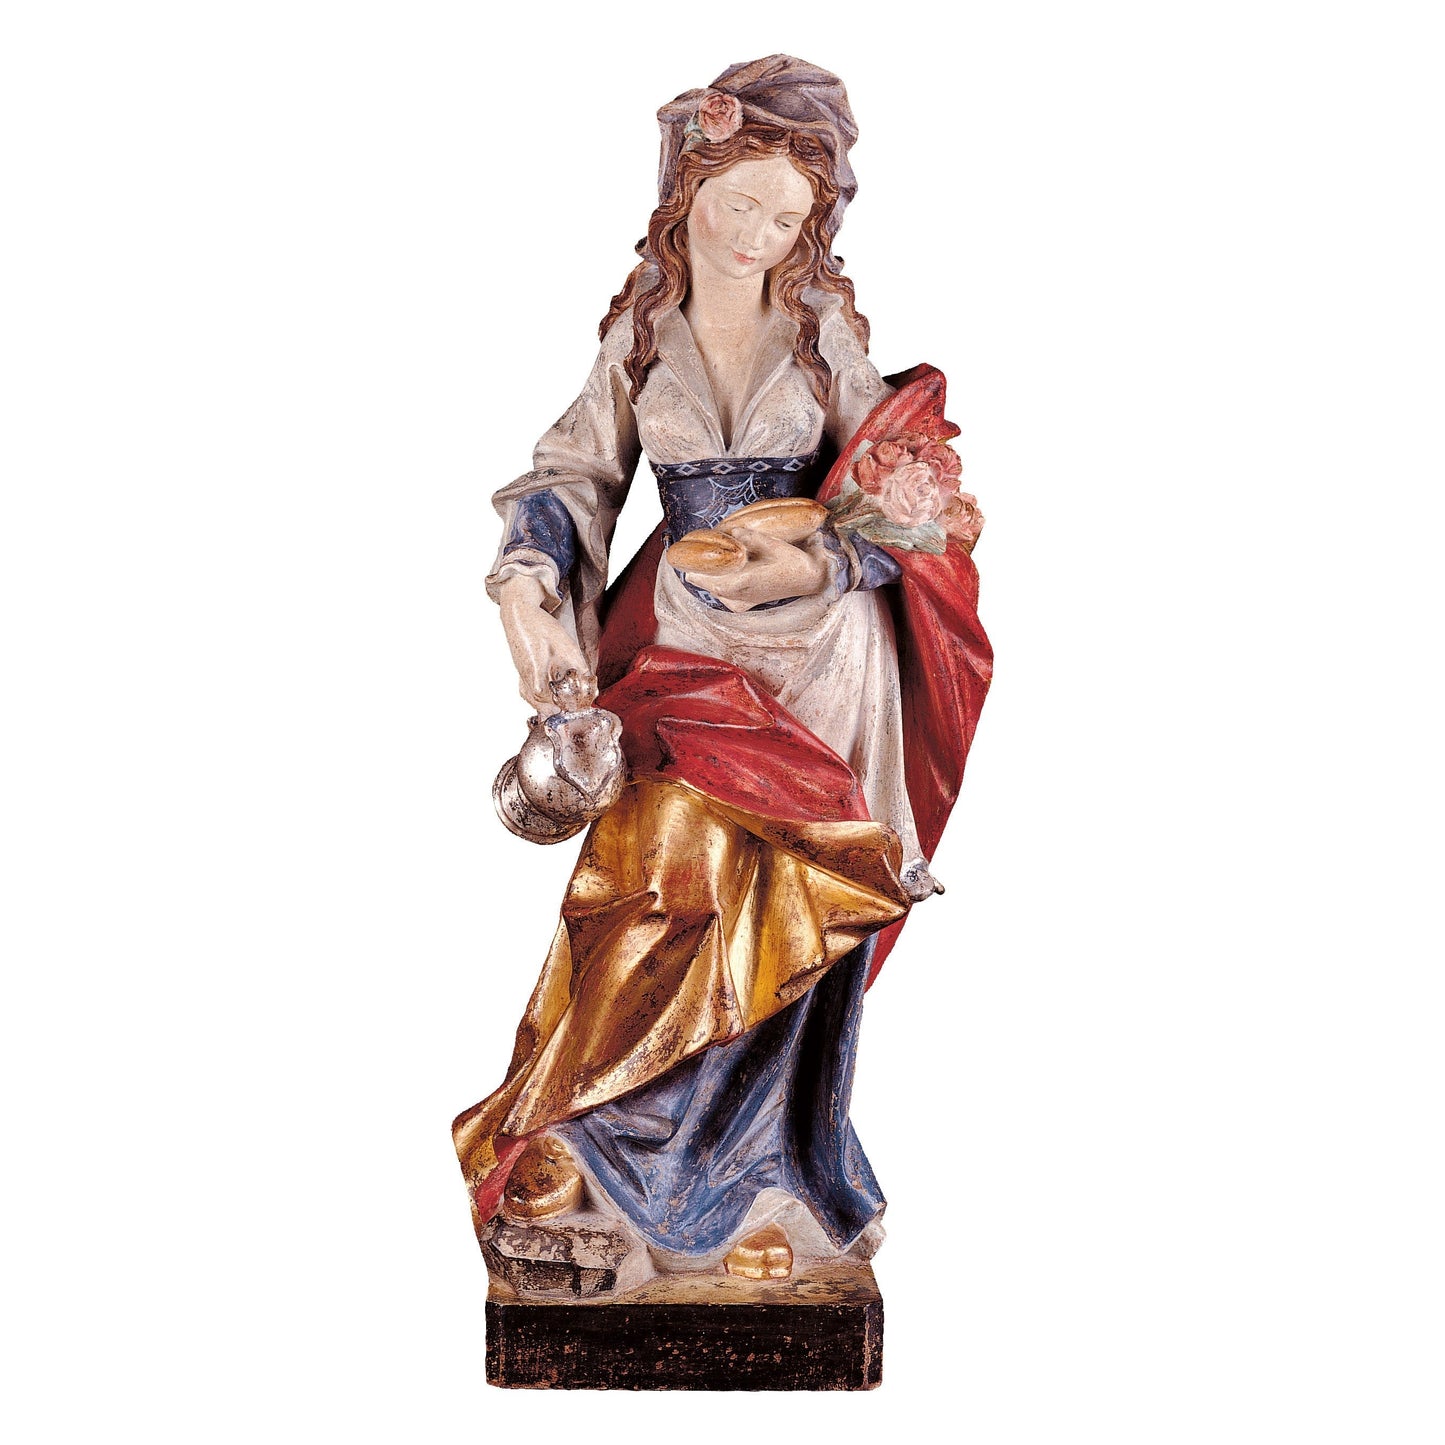 Mondo Cattolico Golden / 36 cm (14.2 in) Wooden statue of St. Elizabeth with roses